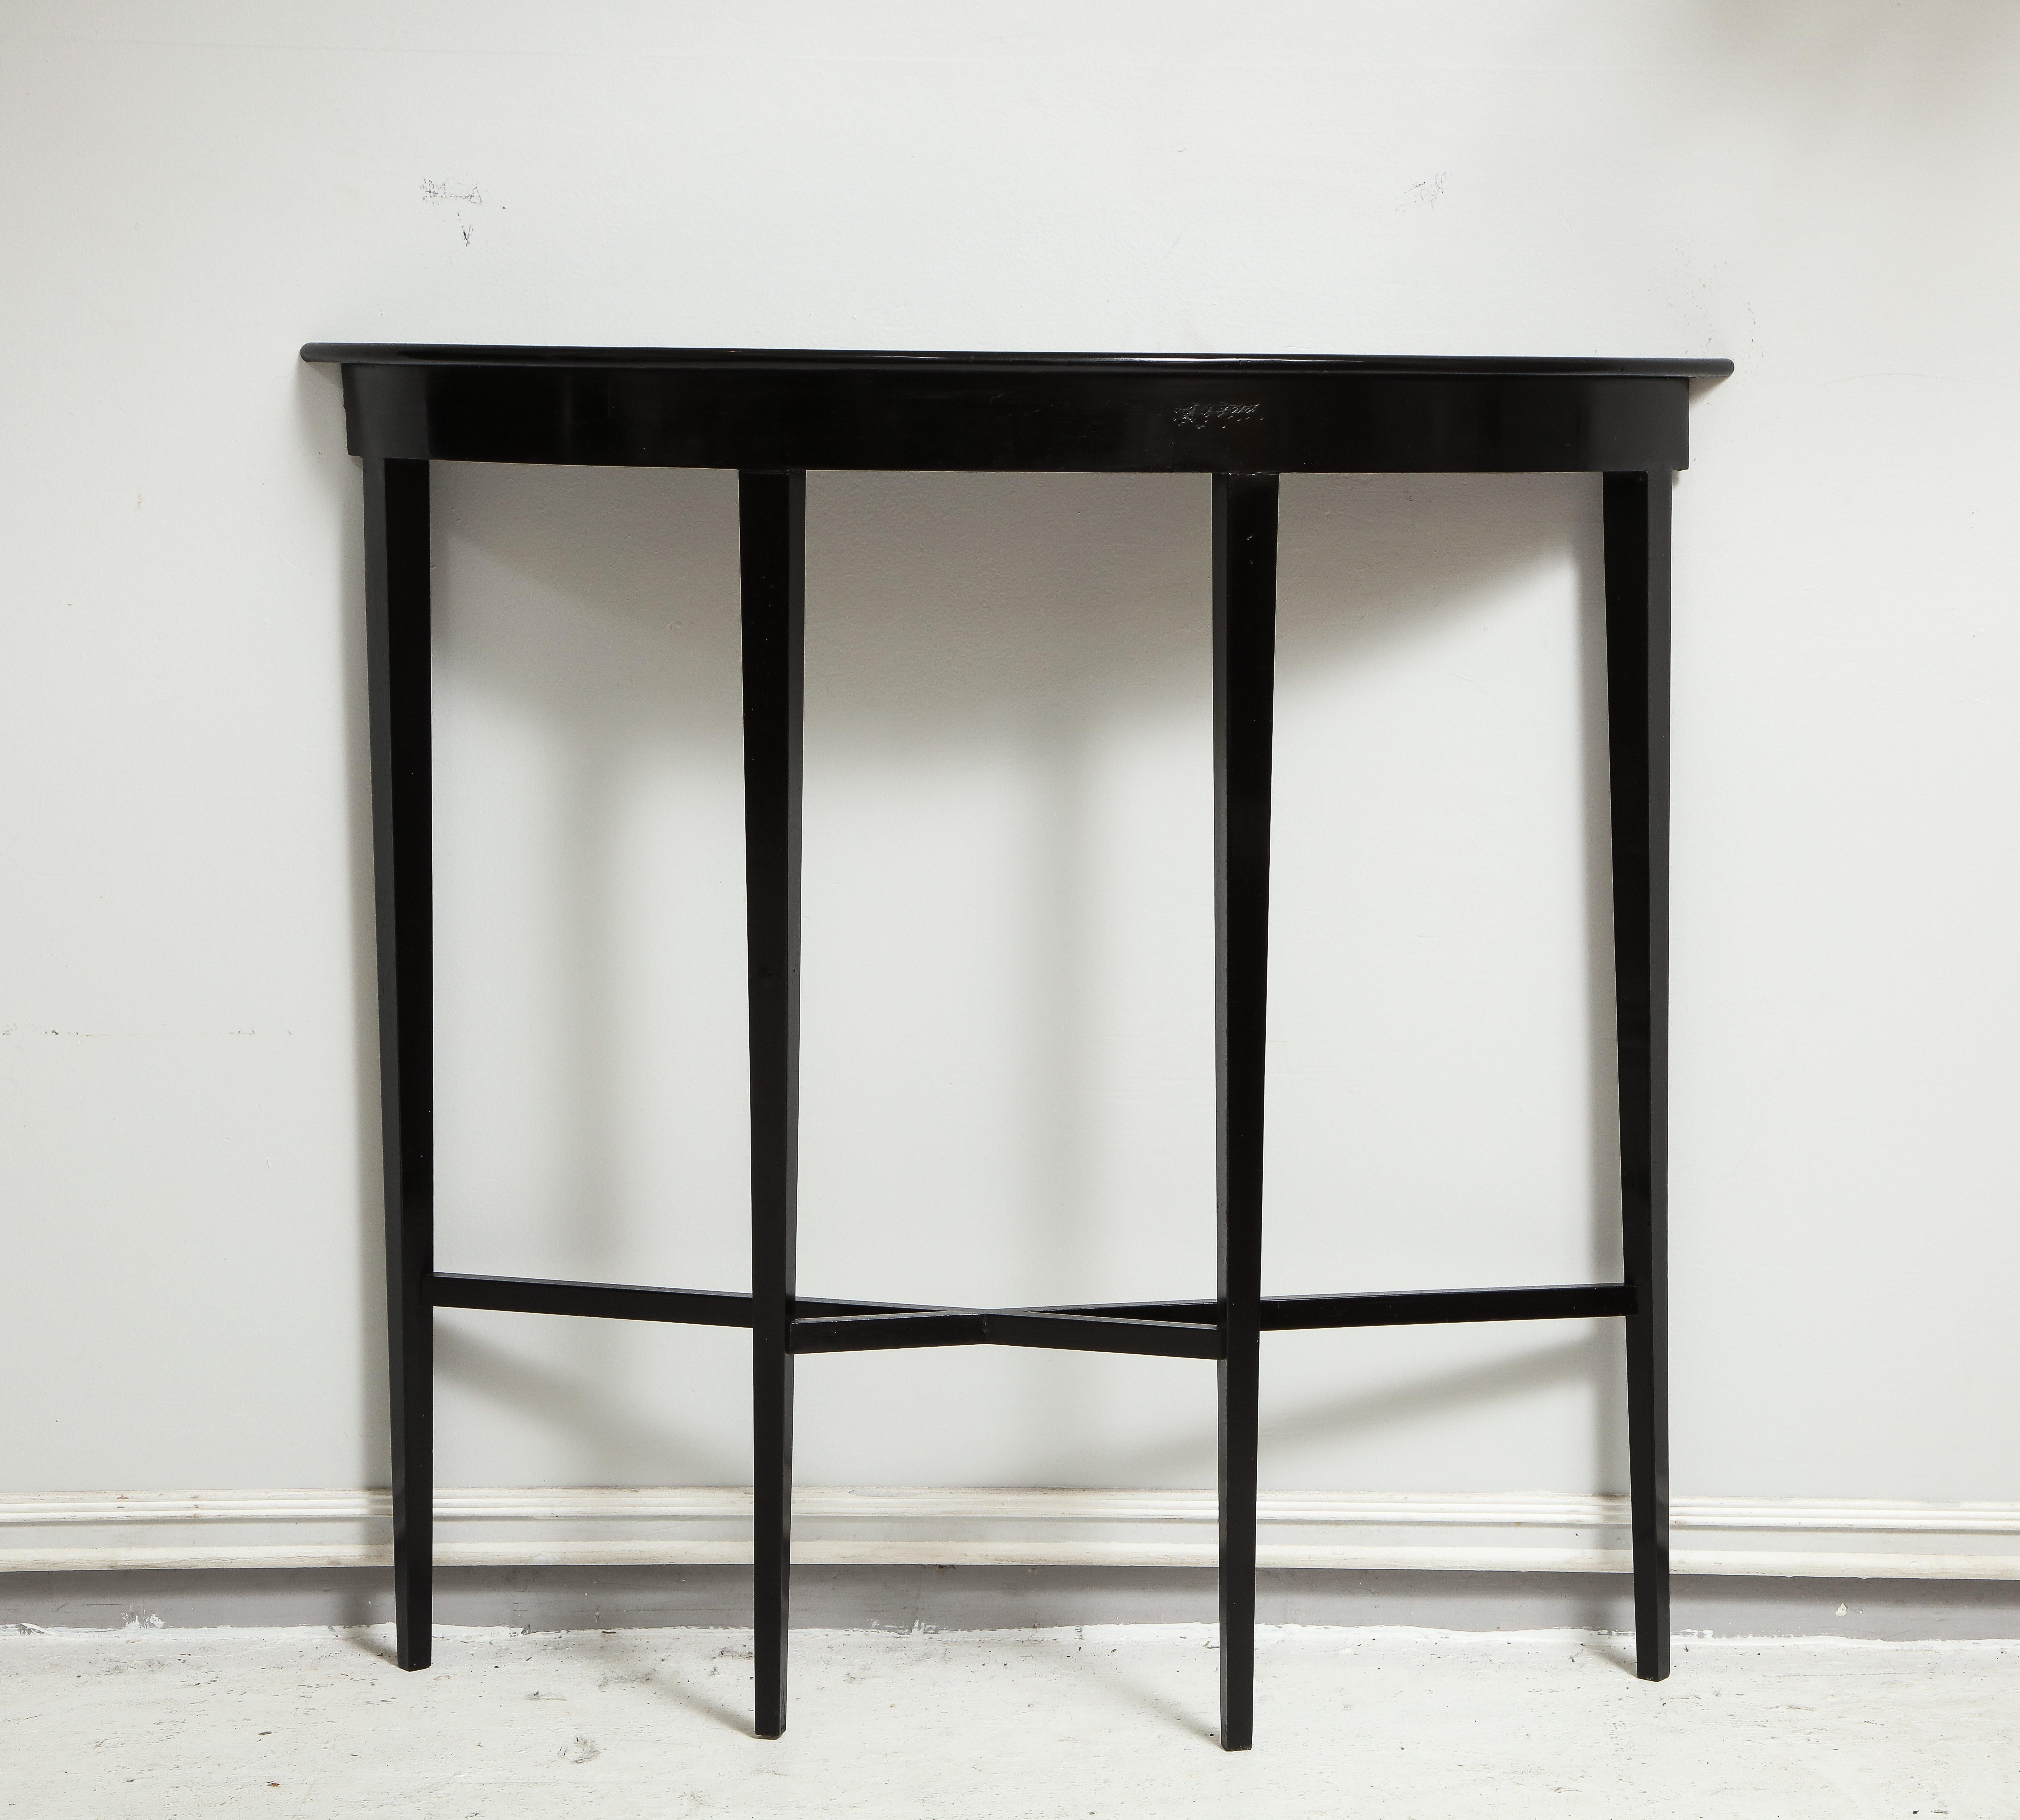 Custom ebonized demilune console on tapered legs.
Please note the lead time for custom made is 8-10 weeks.